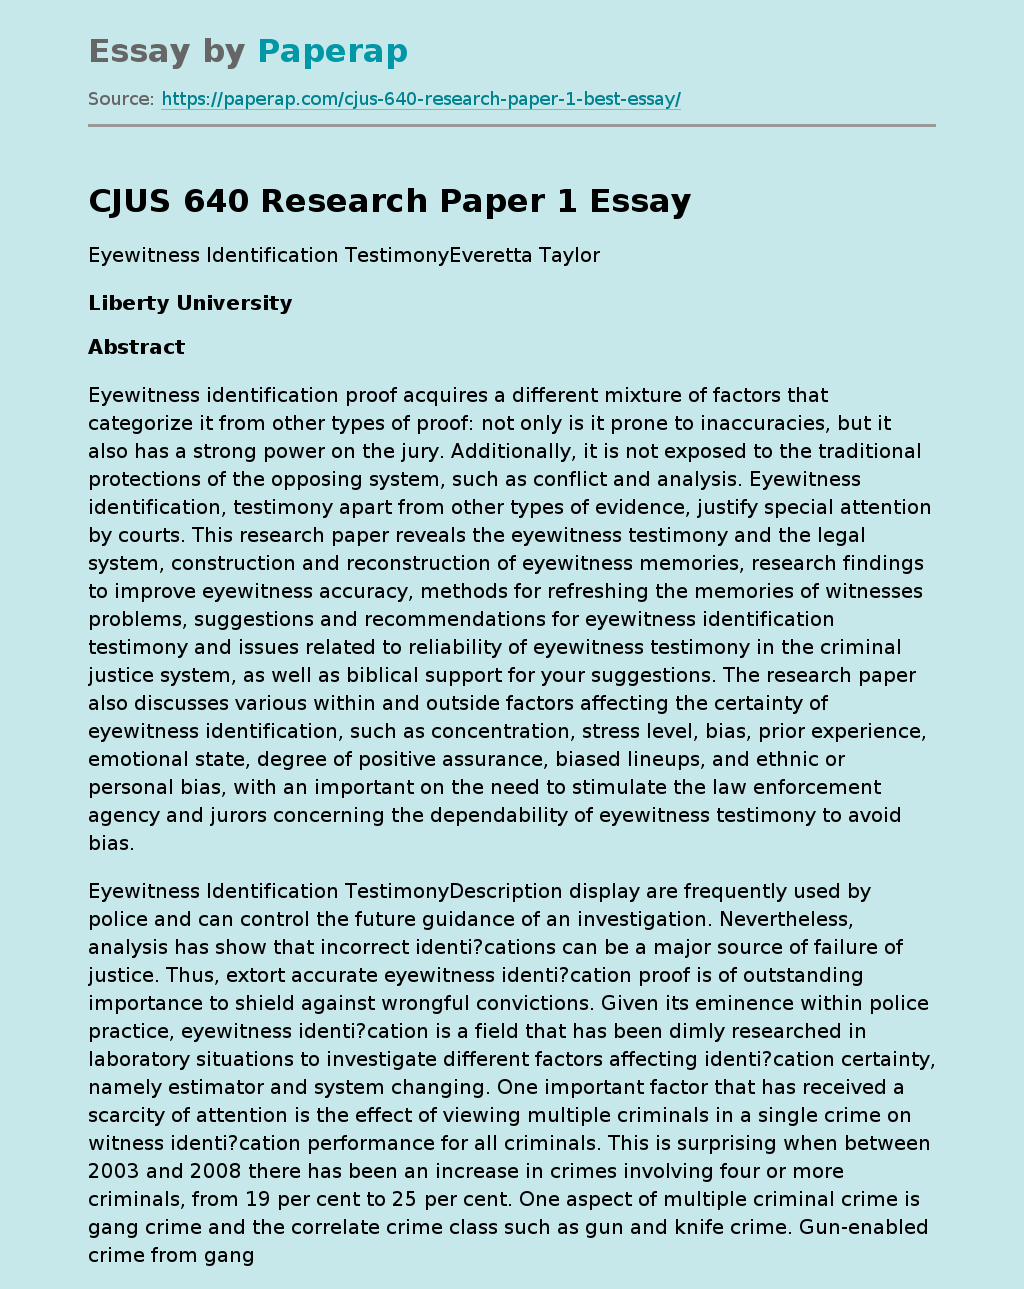 CJUS 640 Research Paper 1